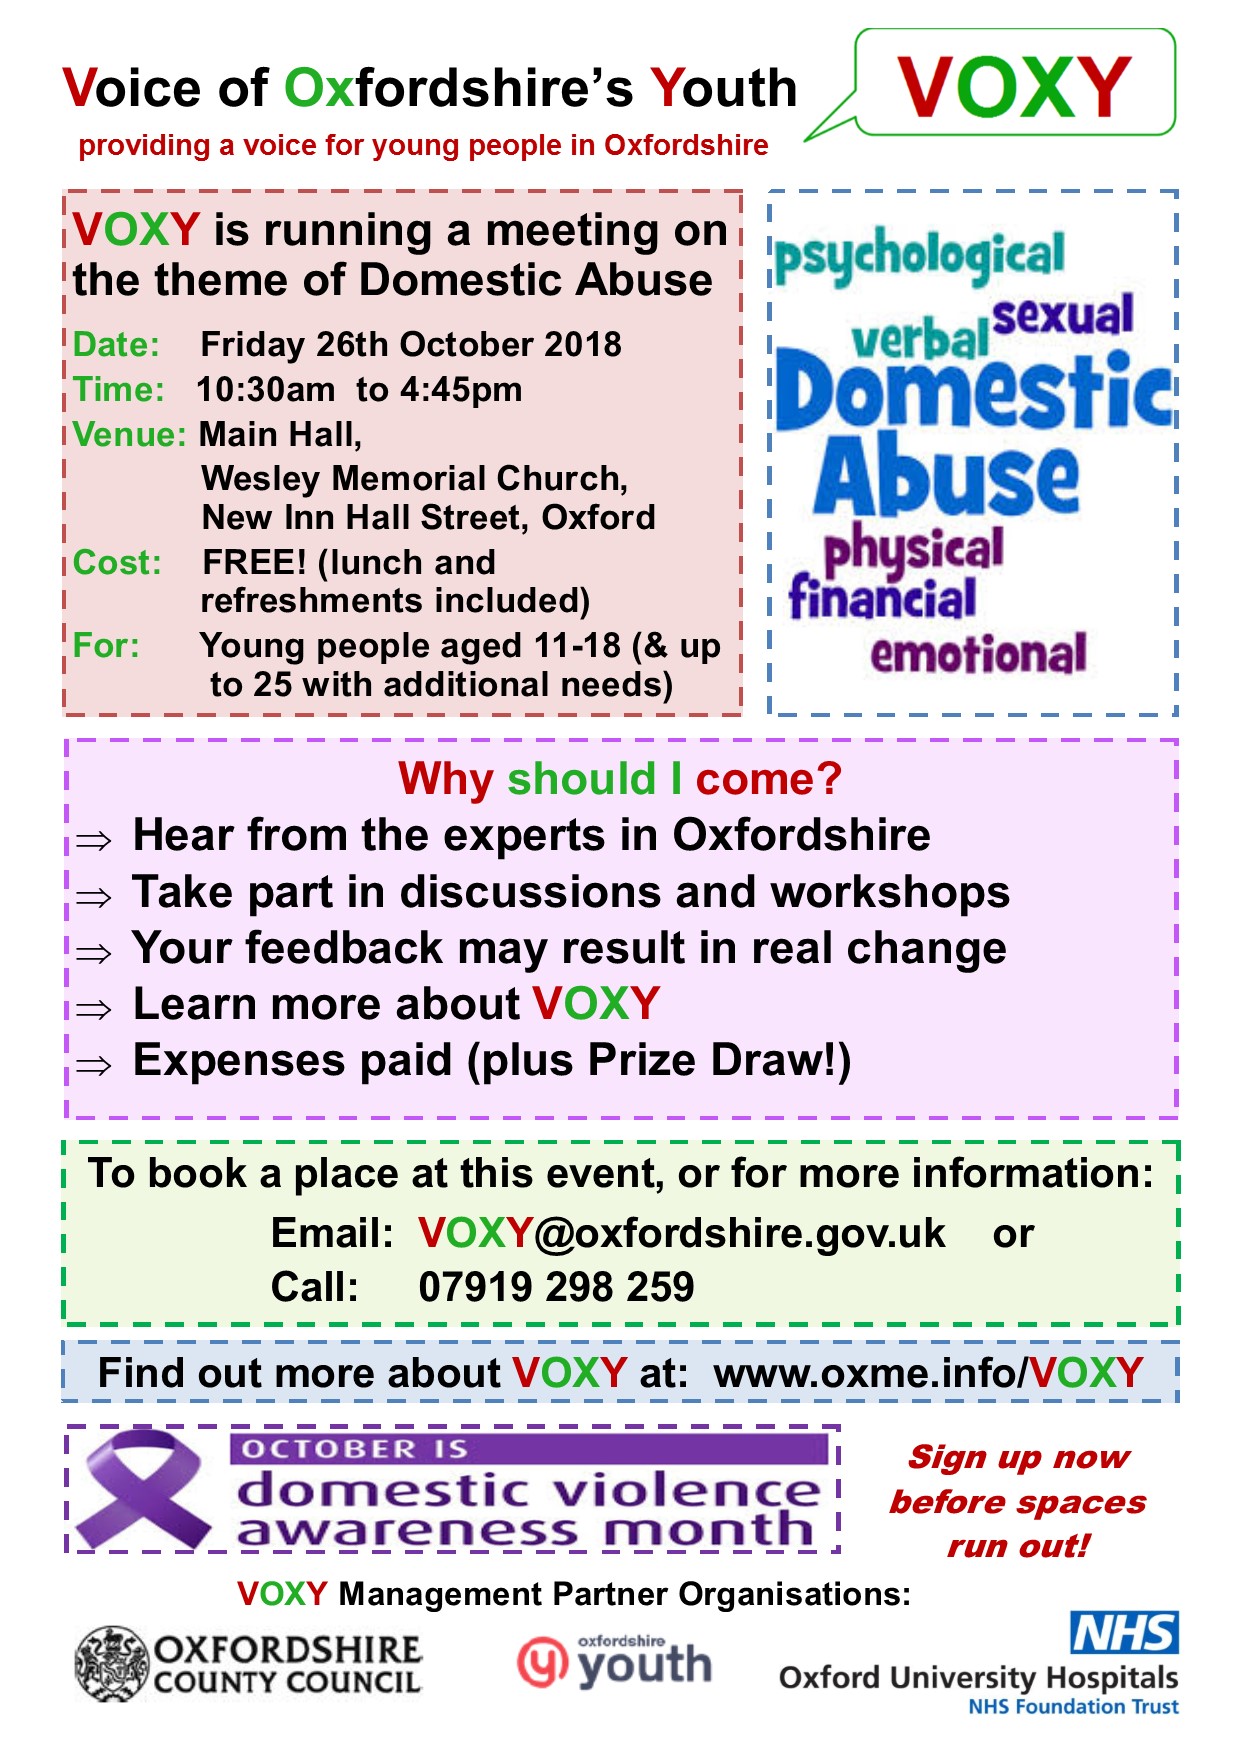 VOXY General Meeting Autumn 2018 - Domestic Abuse